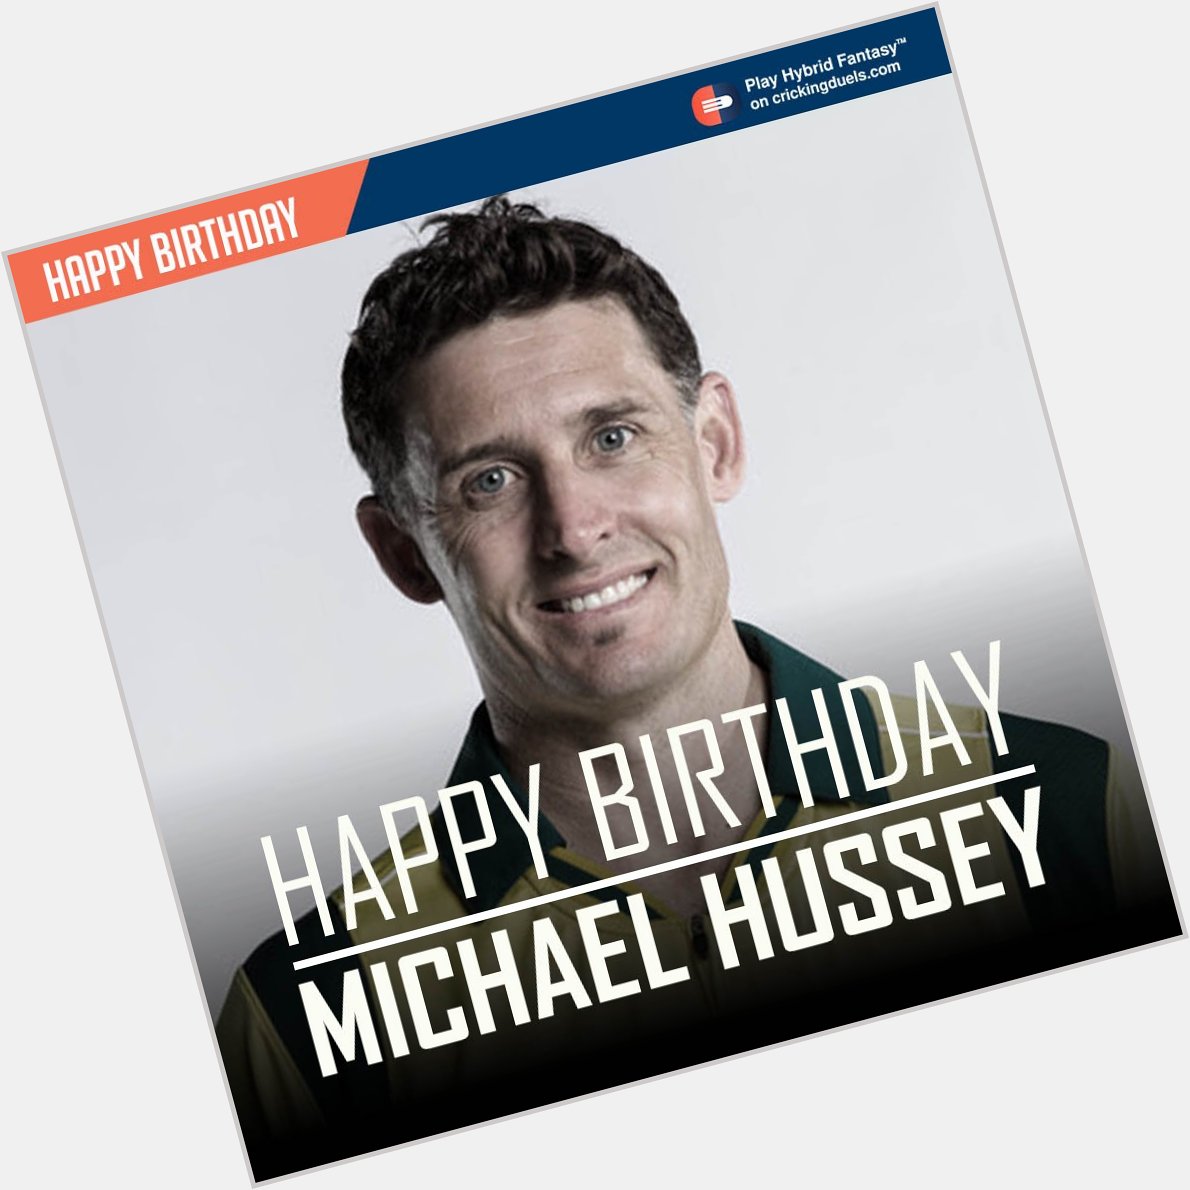 Happy Birthday Michael Hussey. The former Australian cricketer turns 42 today. 